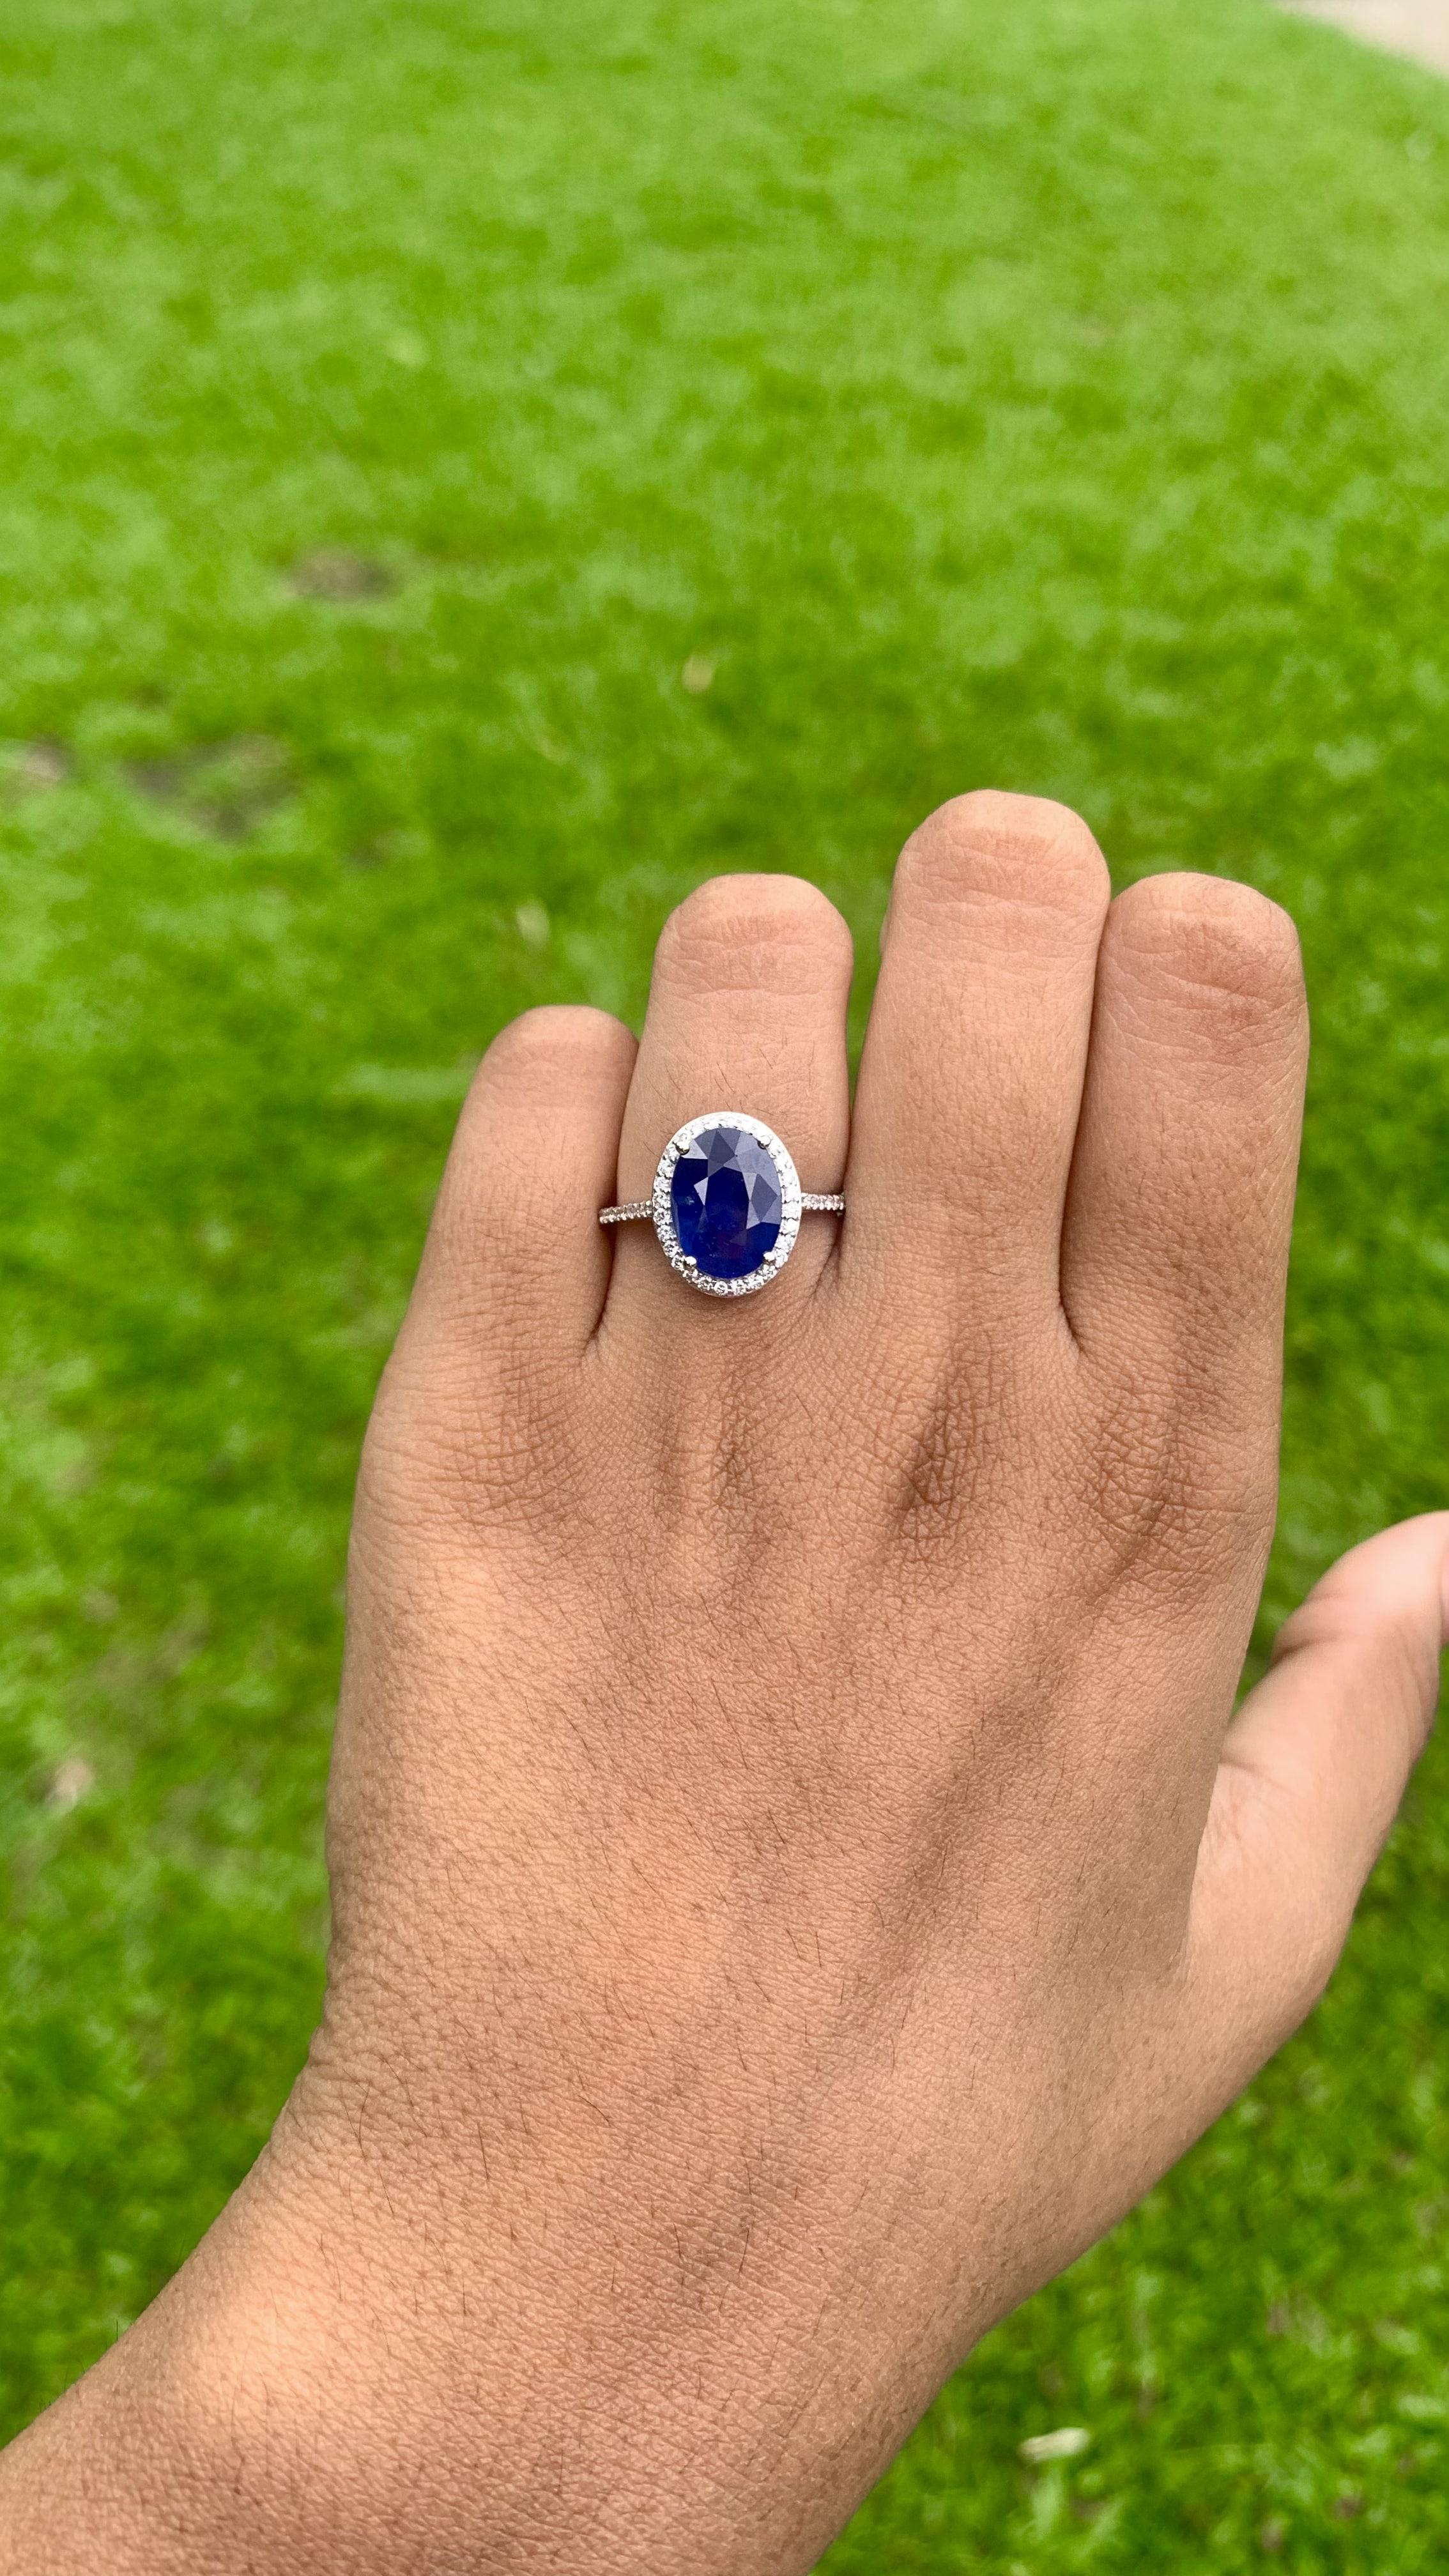 Radiating a classic aura, this remarkable piece has been specially designed to accentuate the mesmerizing beauty of this royal blue sapphire.

The sapphire, a regal emblem of rich sophistication, boasts a captivating royal blue hue and a total